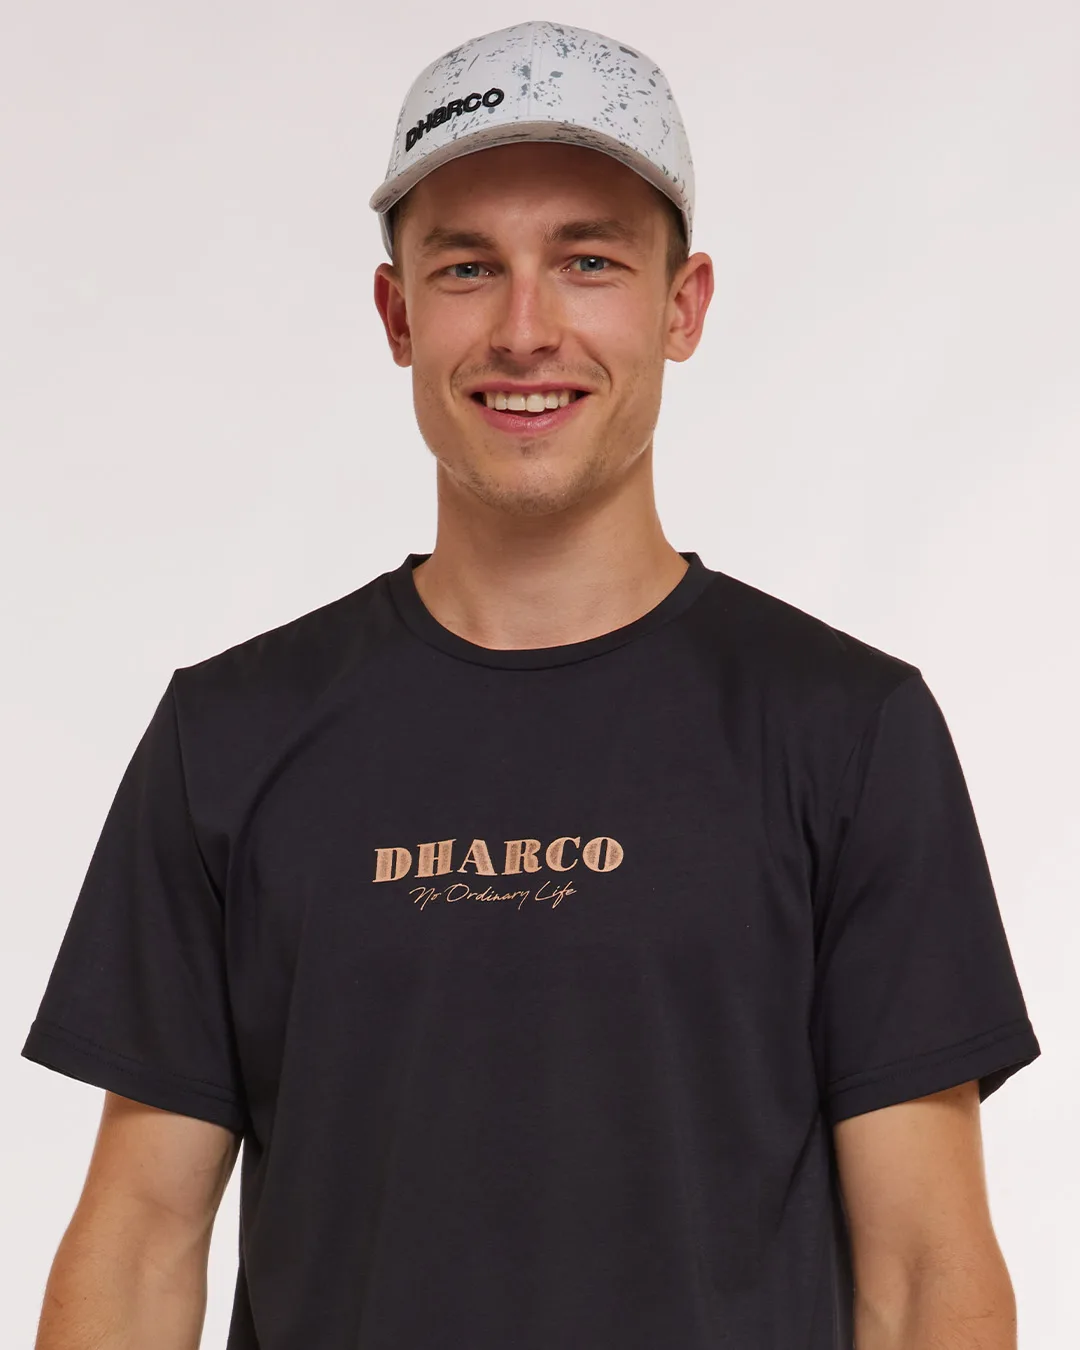 Dharco - Cotton Back - Cookies and Cream - Hvid,Grå